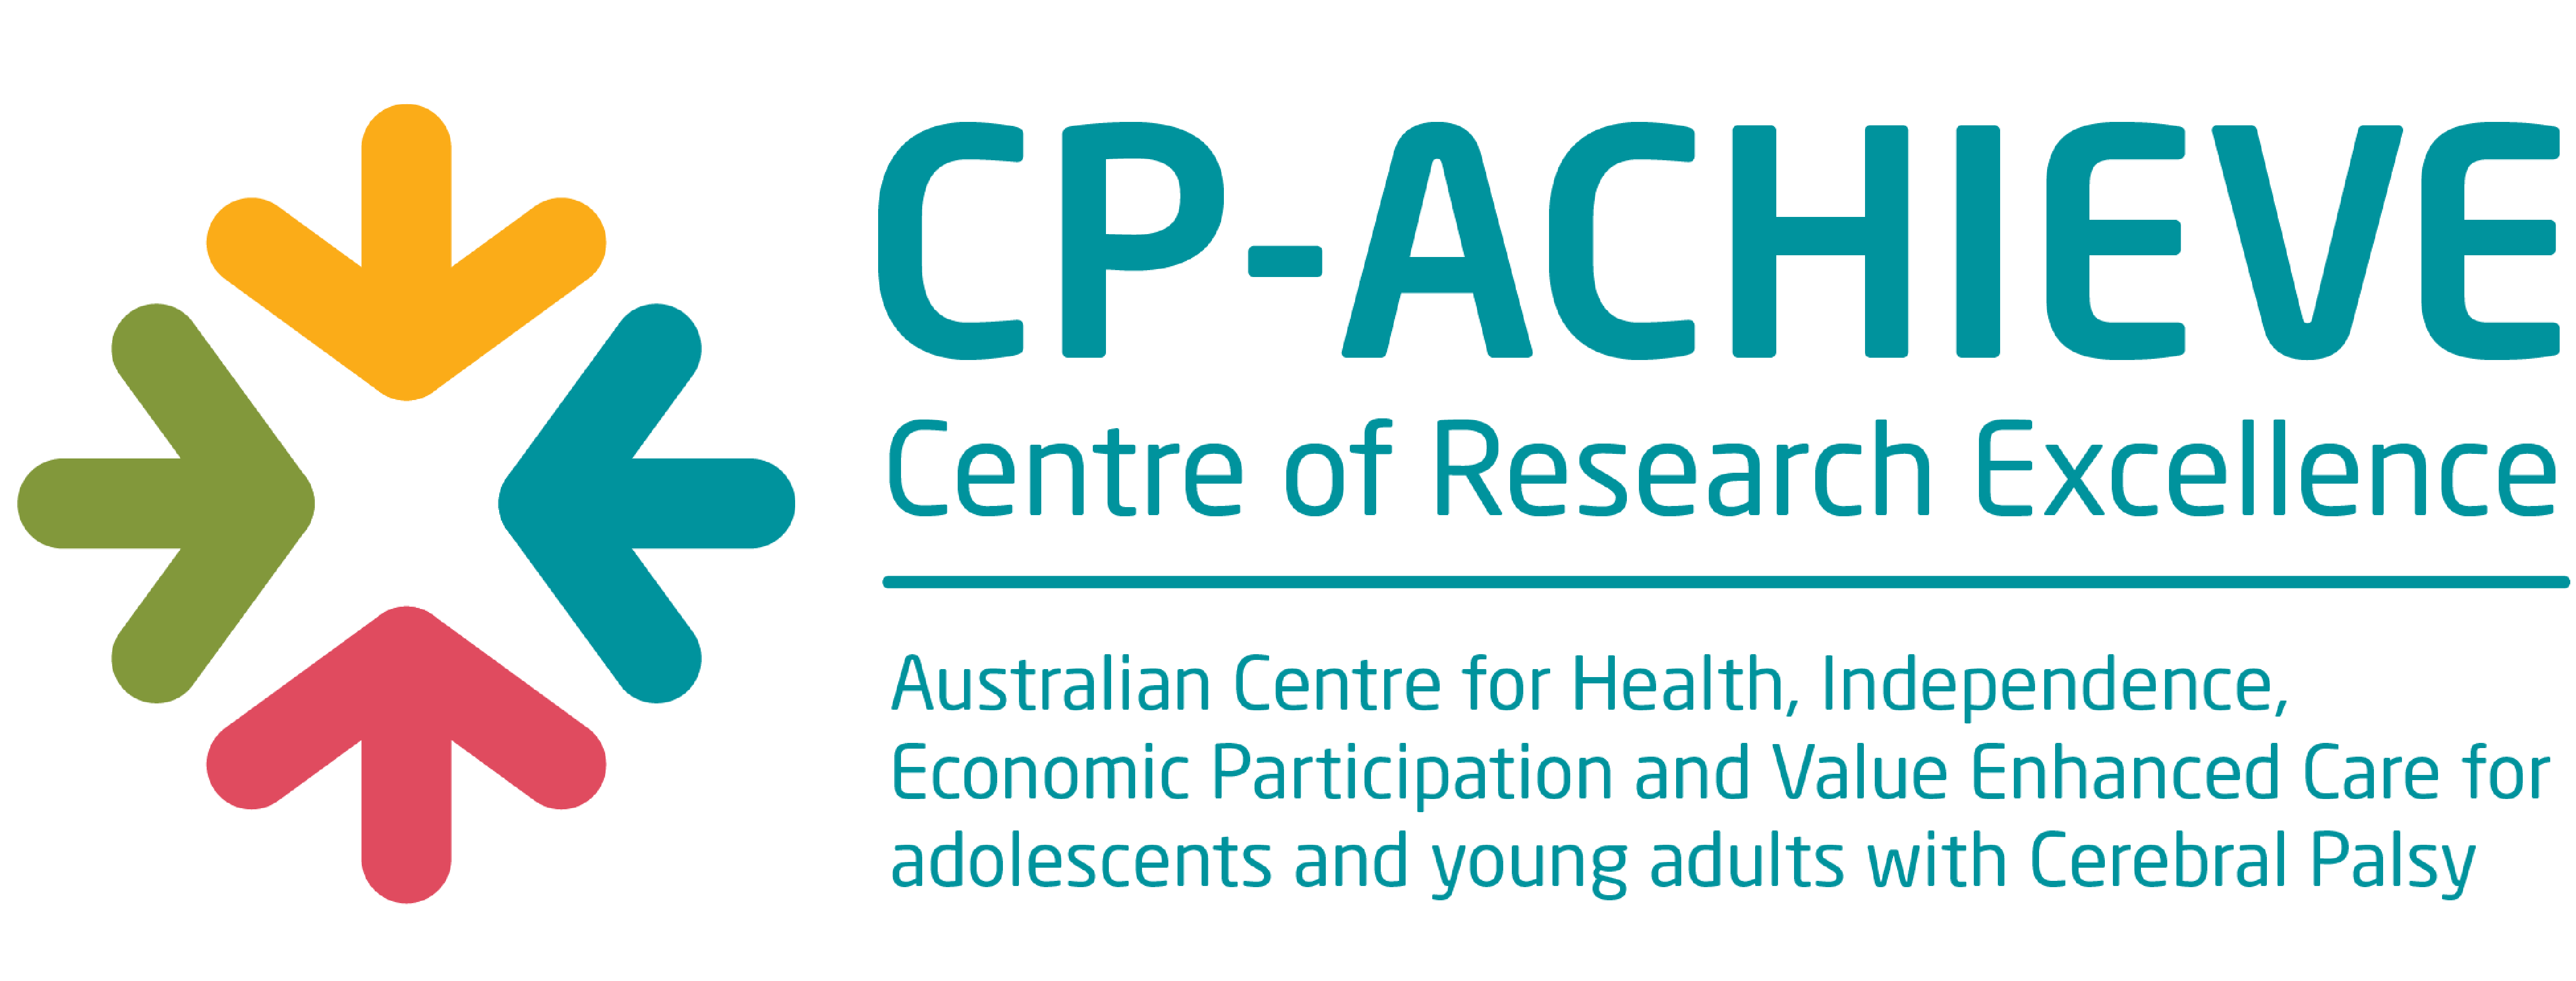 The CP-Achieve Centre of Research Excellence logo. Australian Centre for Health, Independence, Economic Participation, and Value Enhanced Care for adolescents and young adults with Cerebral Palsy.